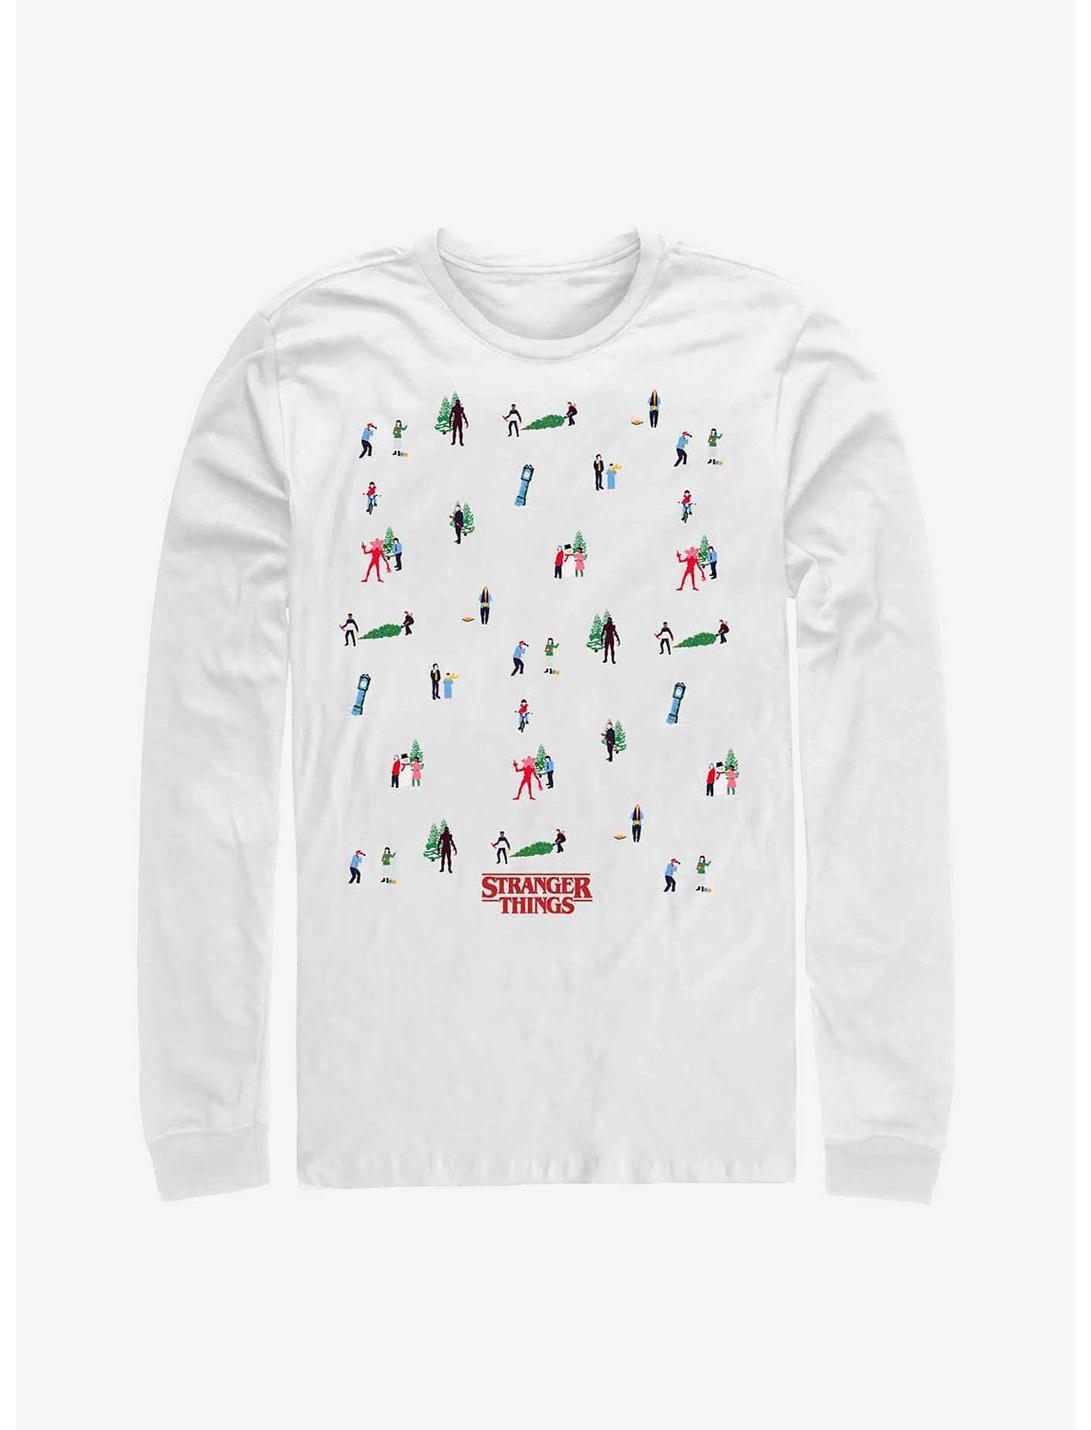 Stranger Things Holiday Tree Scenes Group Long-Sleeve T-Shirt, WHITE, hi-res